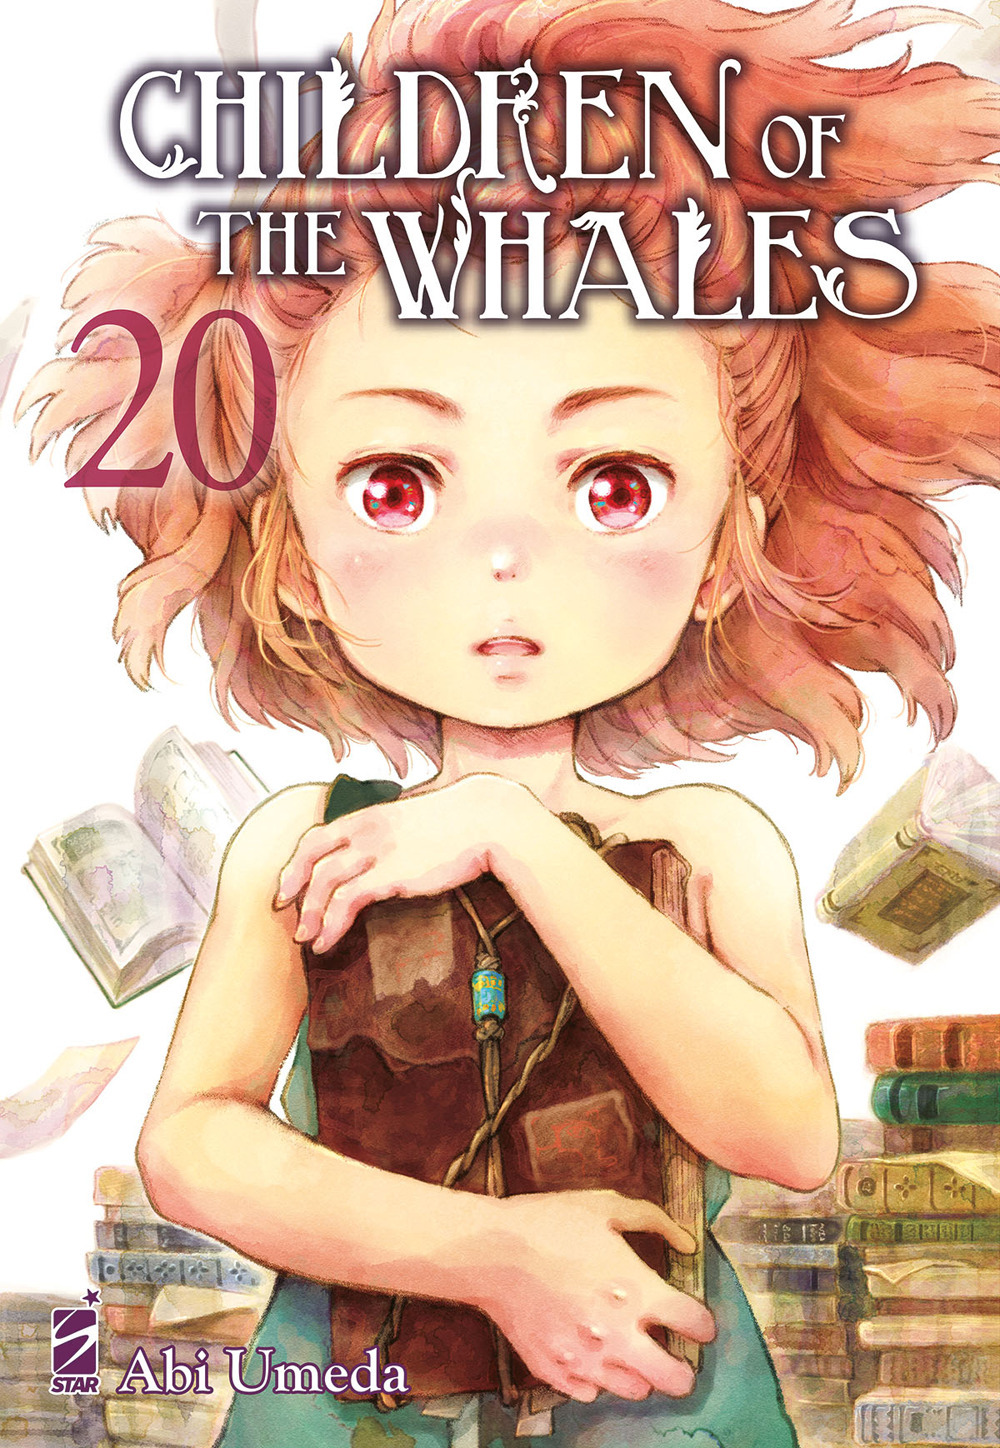 Children of the whales. Vol. 20